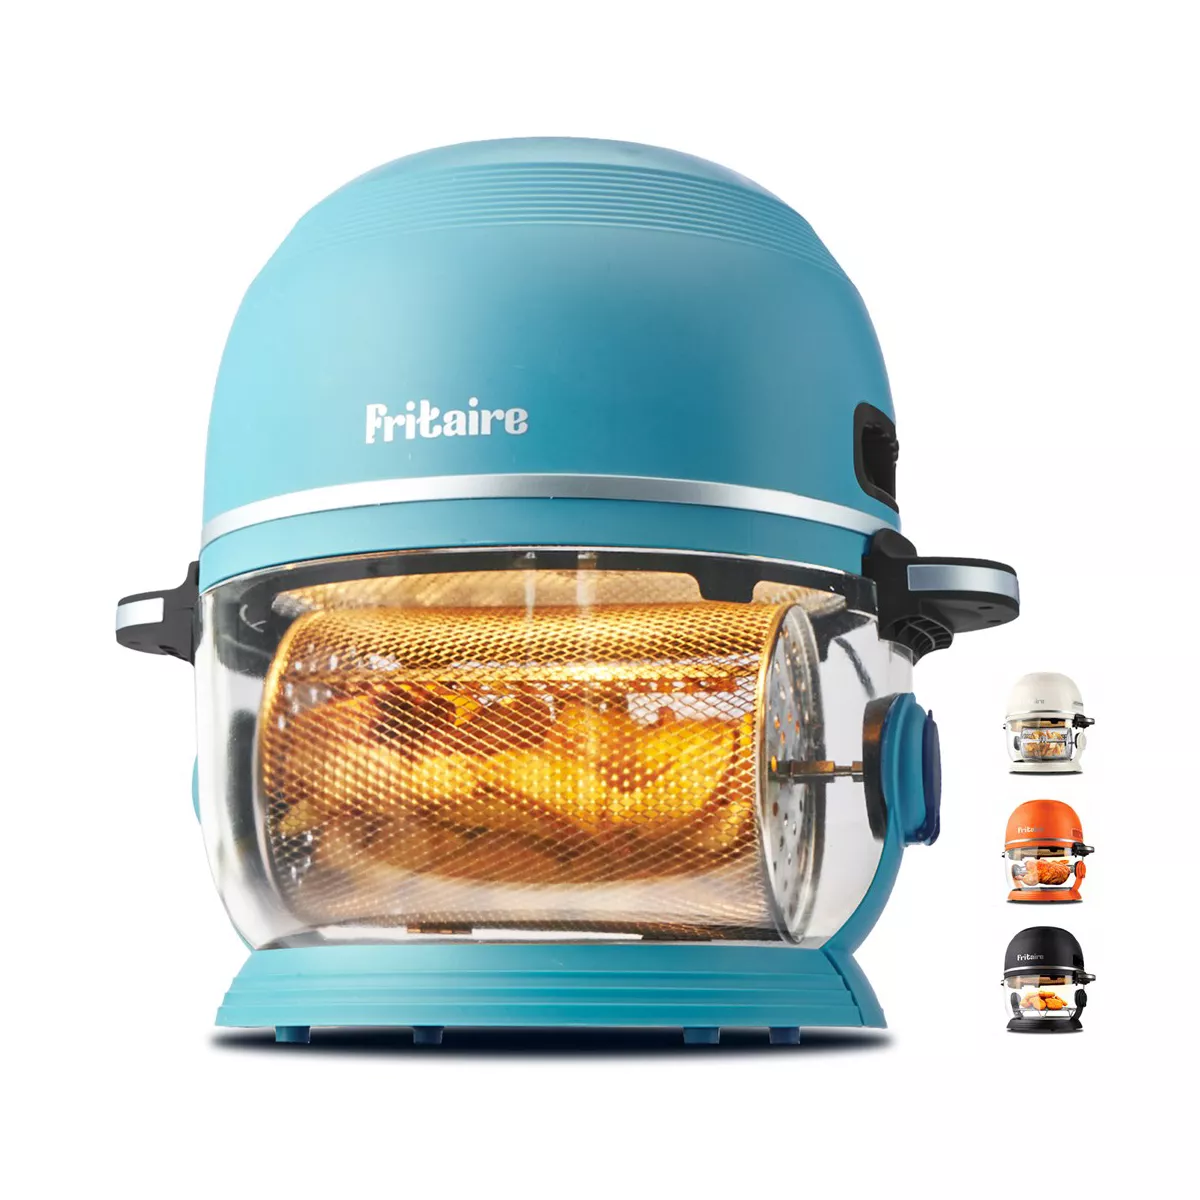 A blue Fritaire glass bowl air fryer sits on a white background next to other color options.